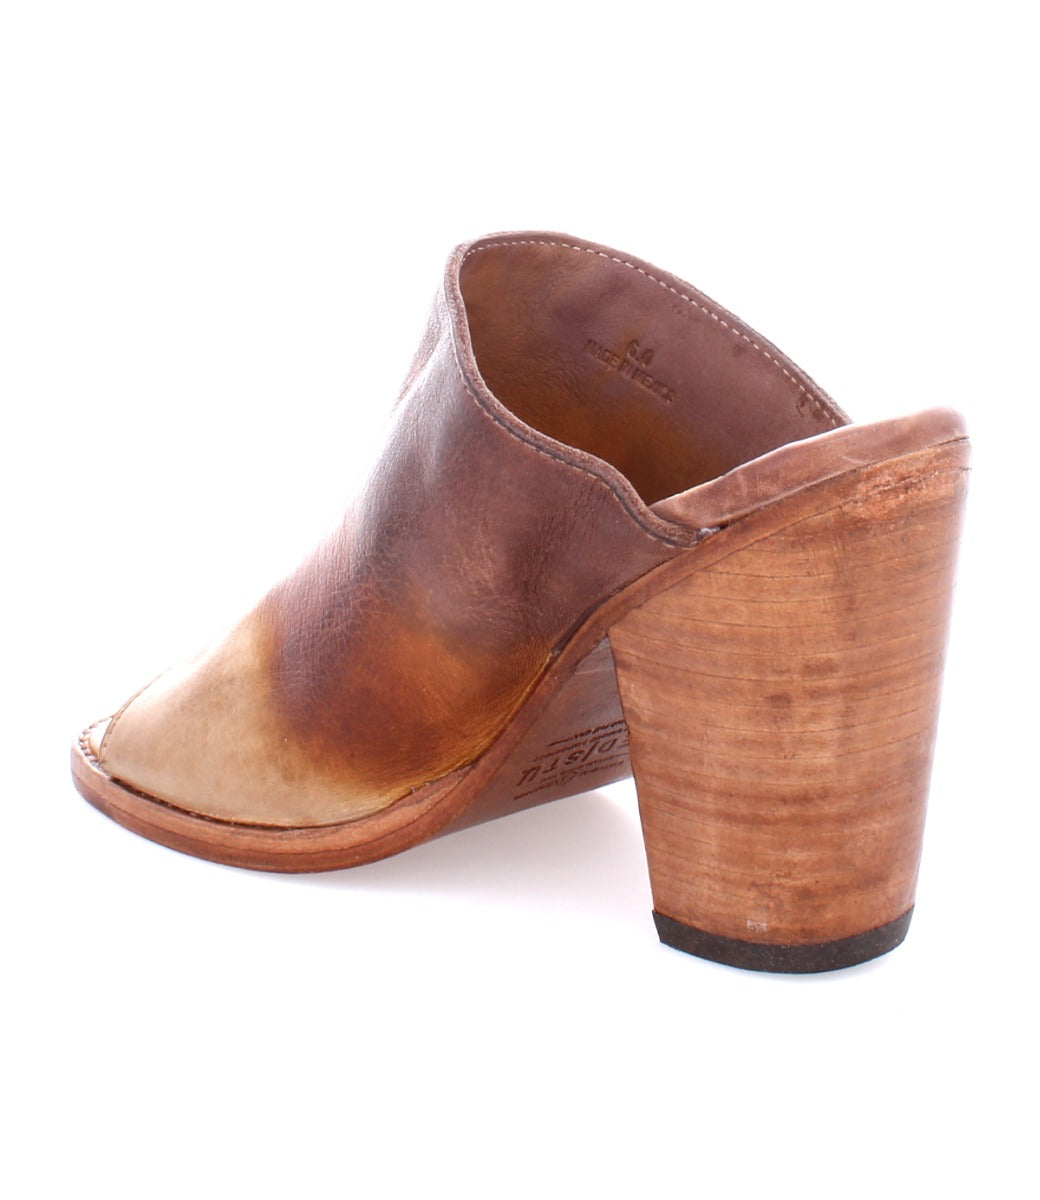 A brown leather Clavel mule with a wooden heel by Bed Stu.